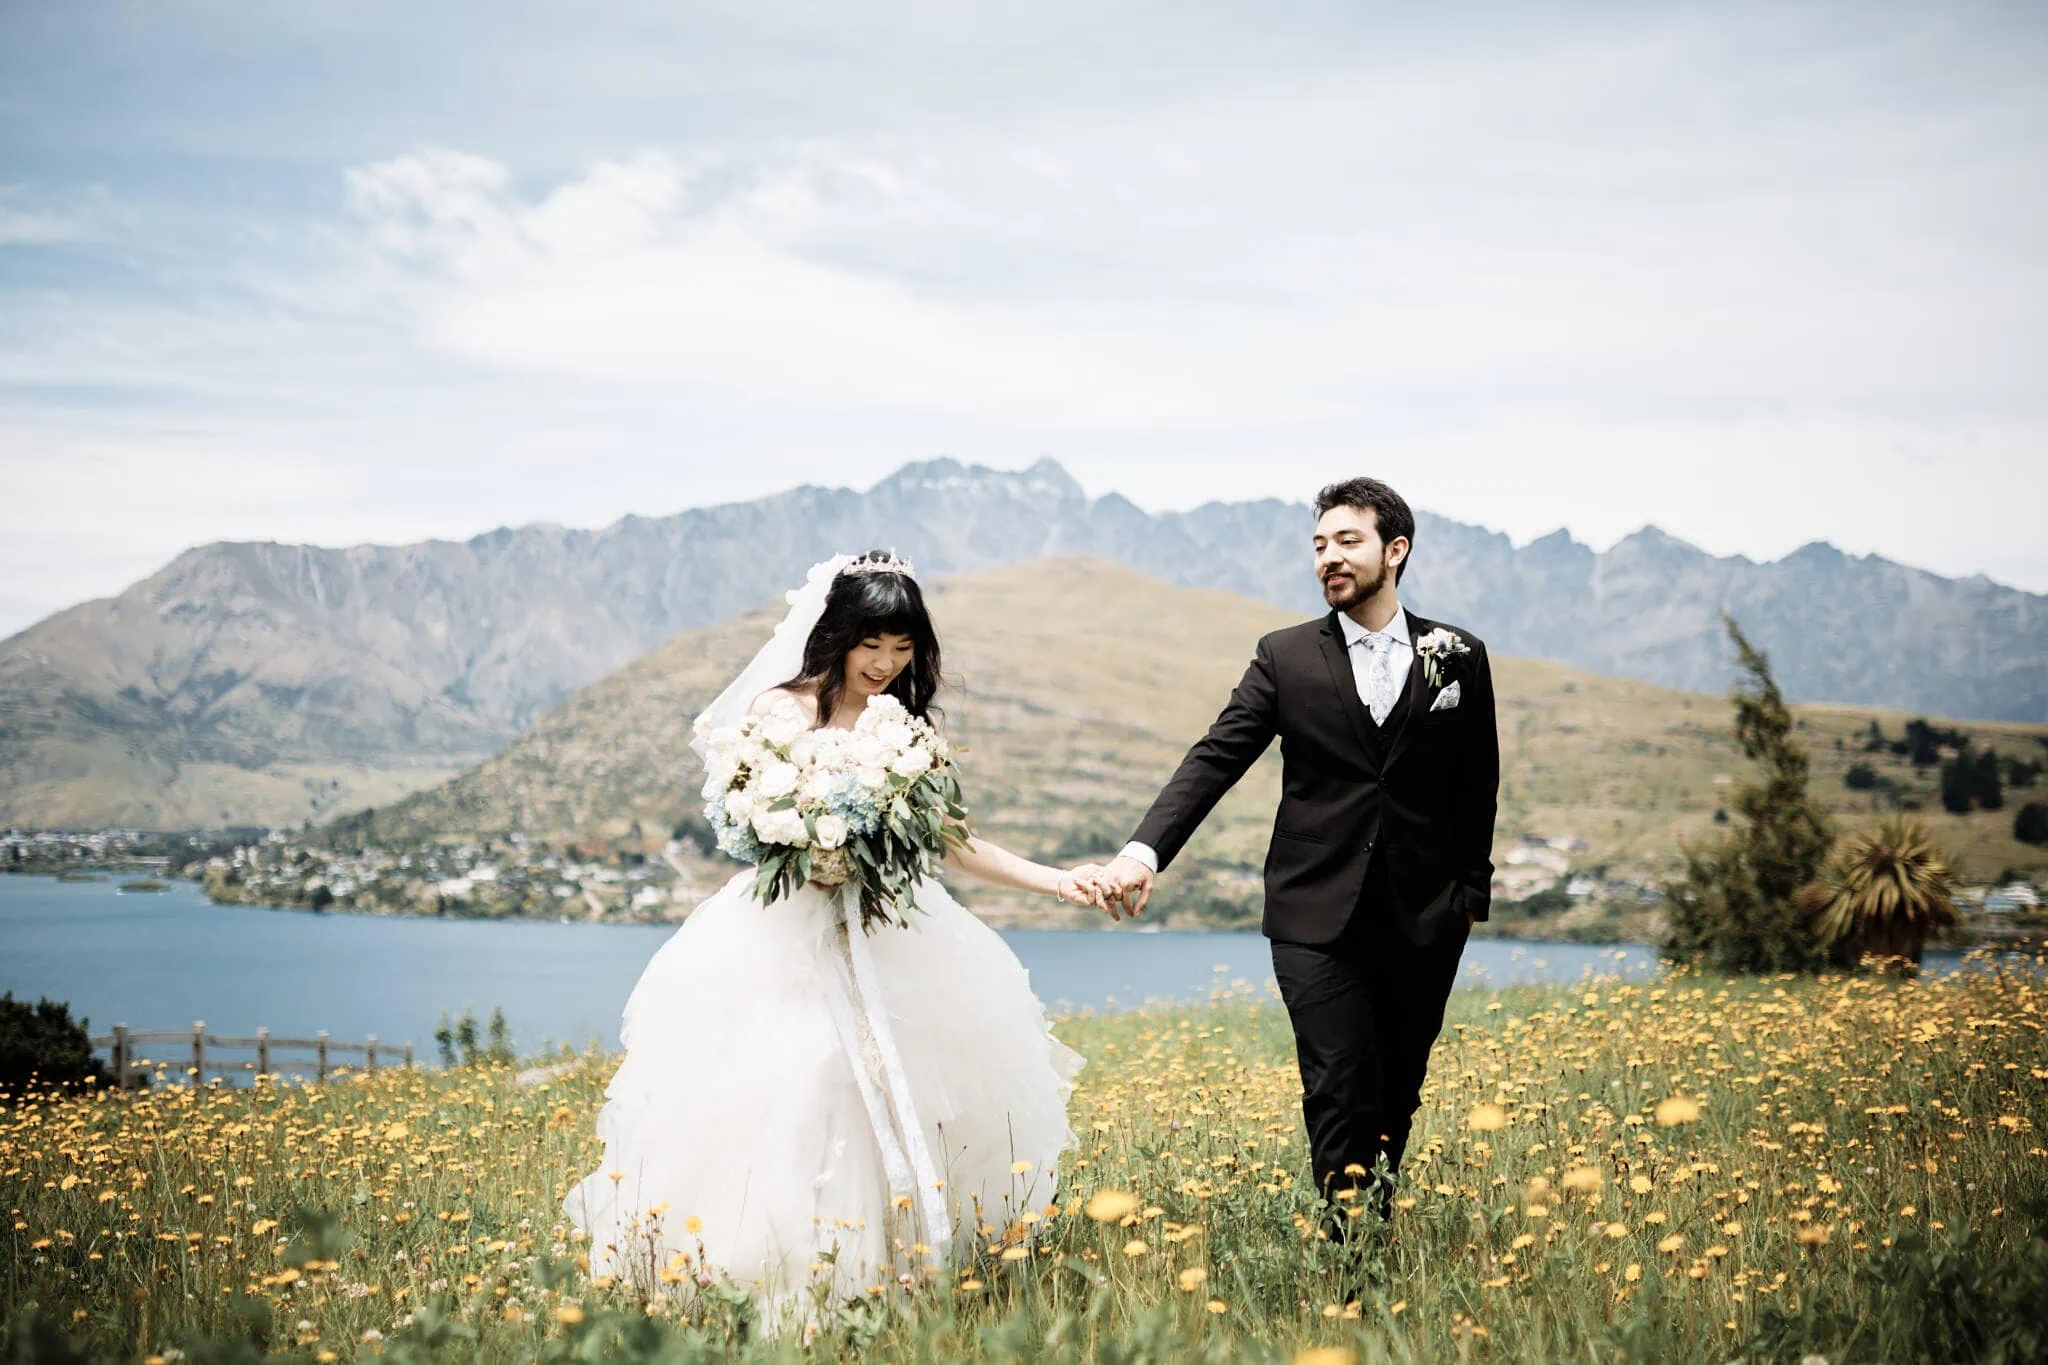 Carlos and Wanzhu sharing an Intimate Helicopter Elopement Wedding with stunning mountain backdrop.